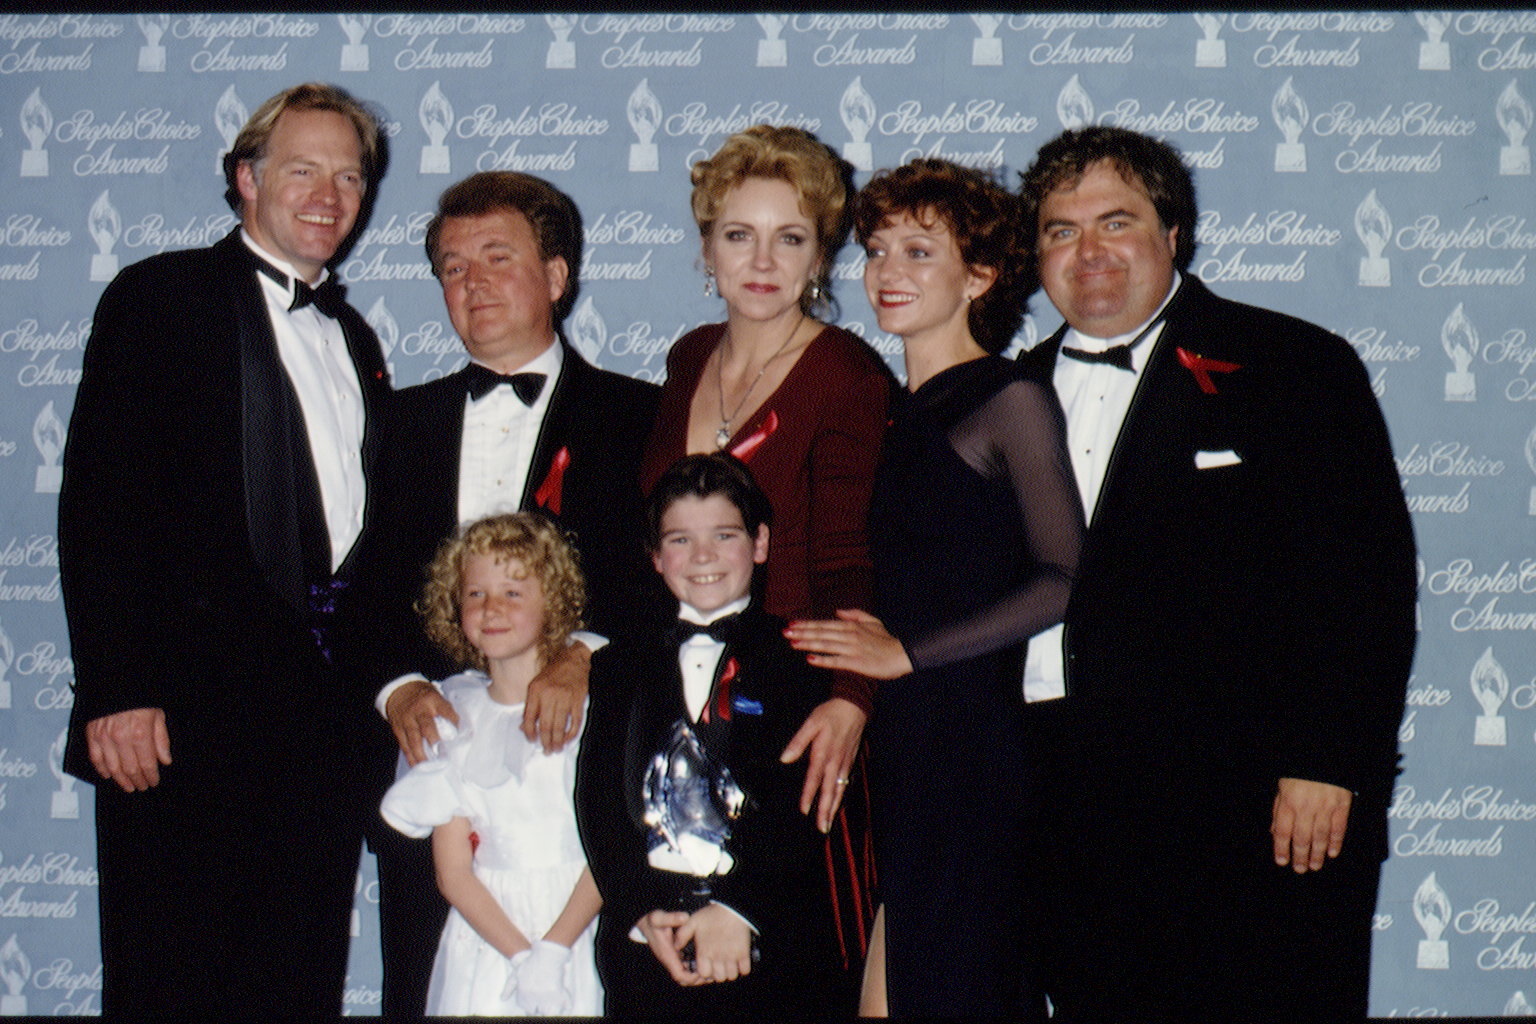 Brett Butler and her "Grace Under Fire" colleagues at the 20th Peoples Choice Awards Ceremony on March 10, 1994 | Source: Getty Images